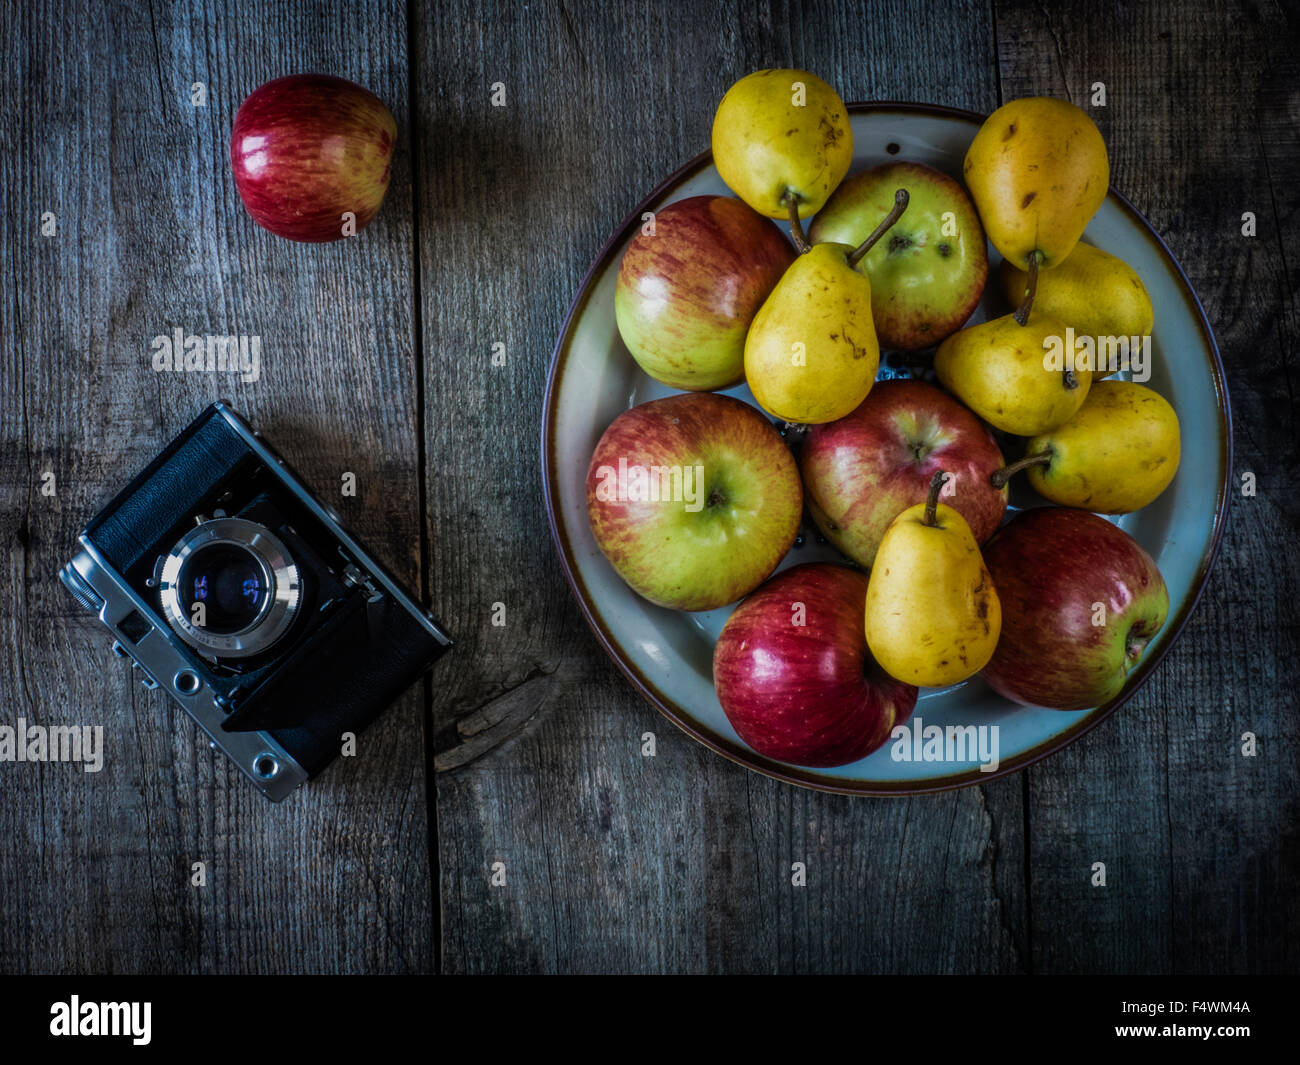 antique photo camera, pears and apples on wooden weathering background Stock Photo